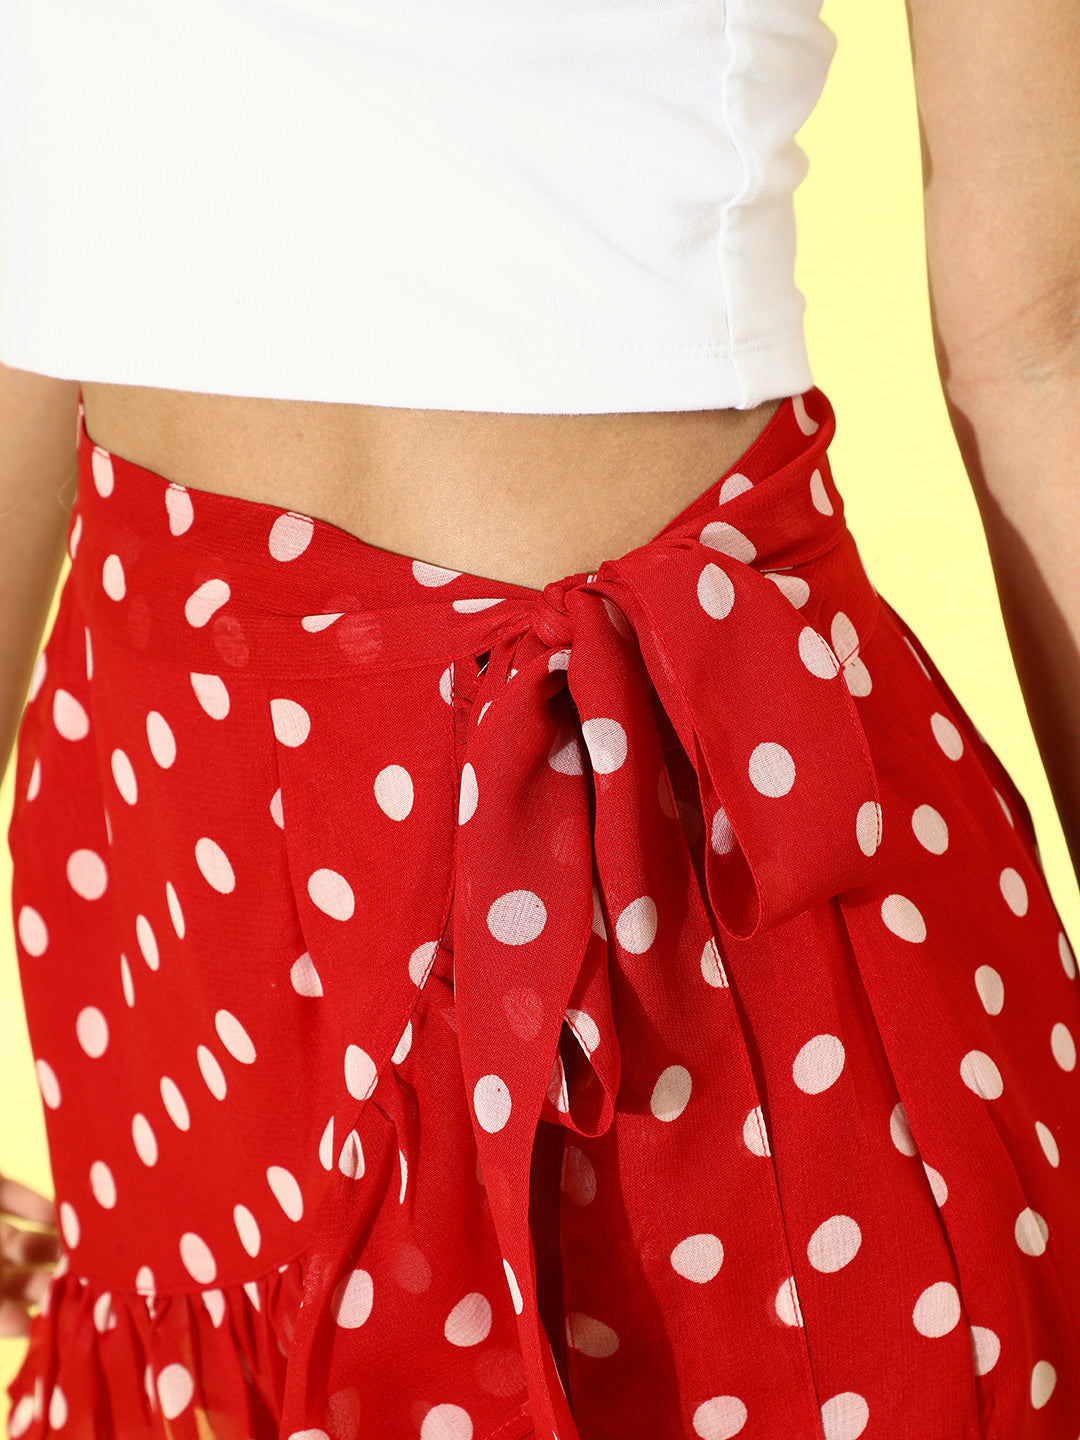 Cation Solid White And Red Polka Clothing Set